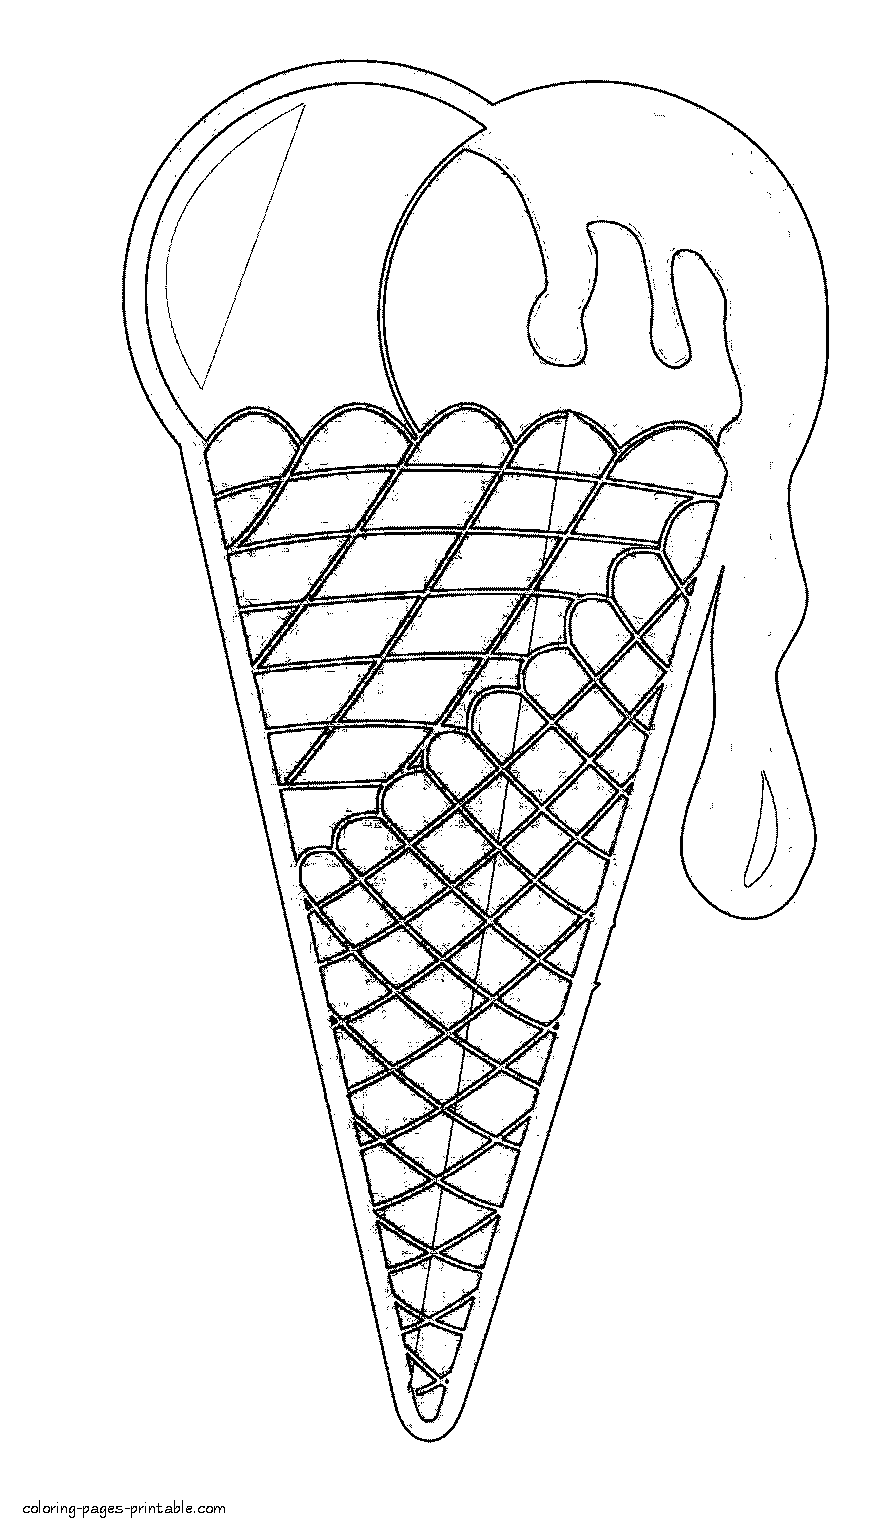 Download Ice cream cone coloring pages || COLORING-PAGES-PRINTABLE.COM